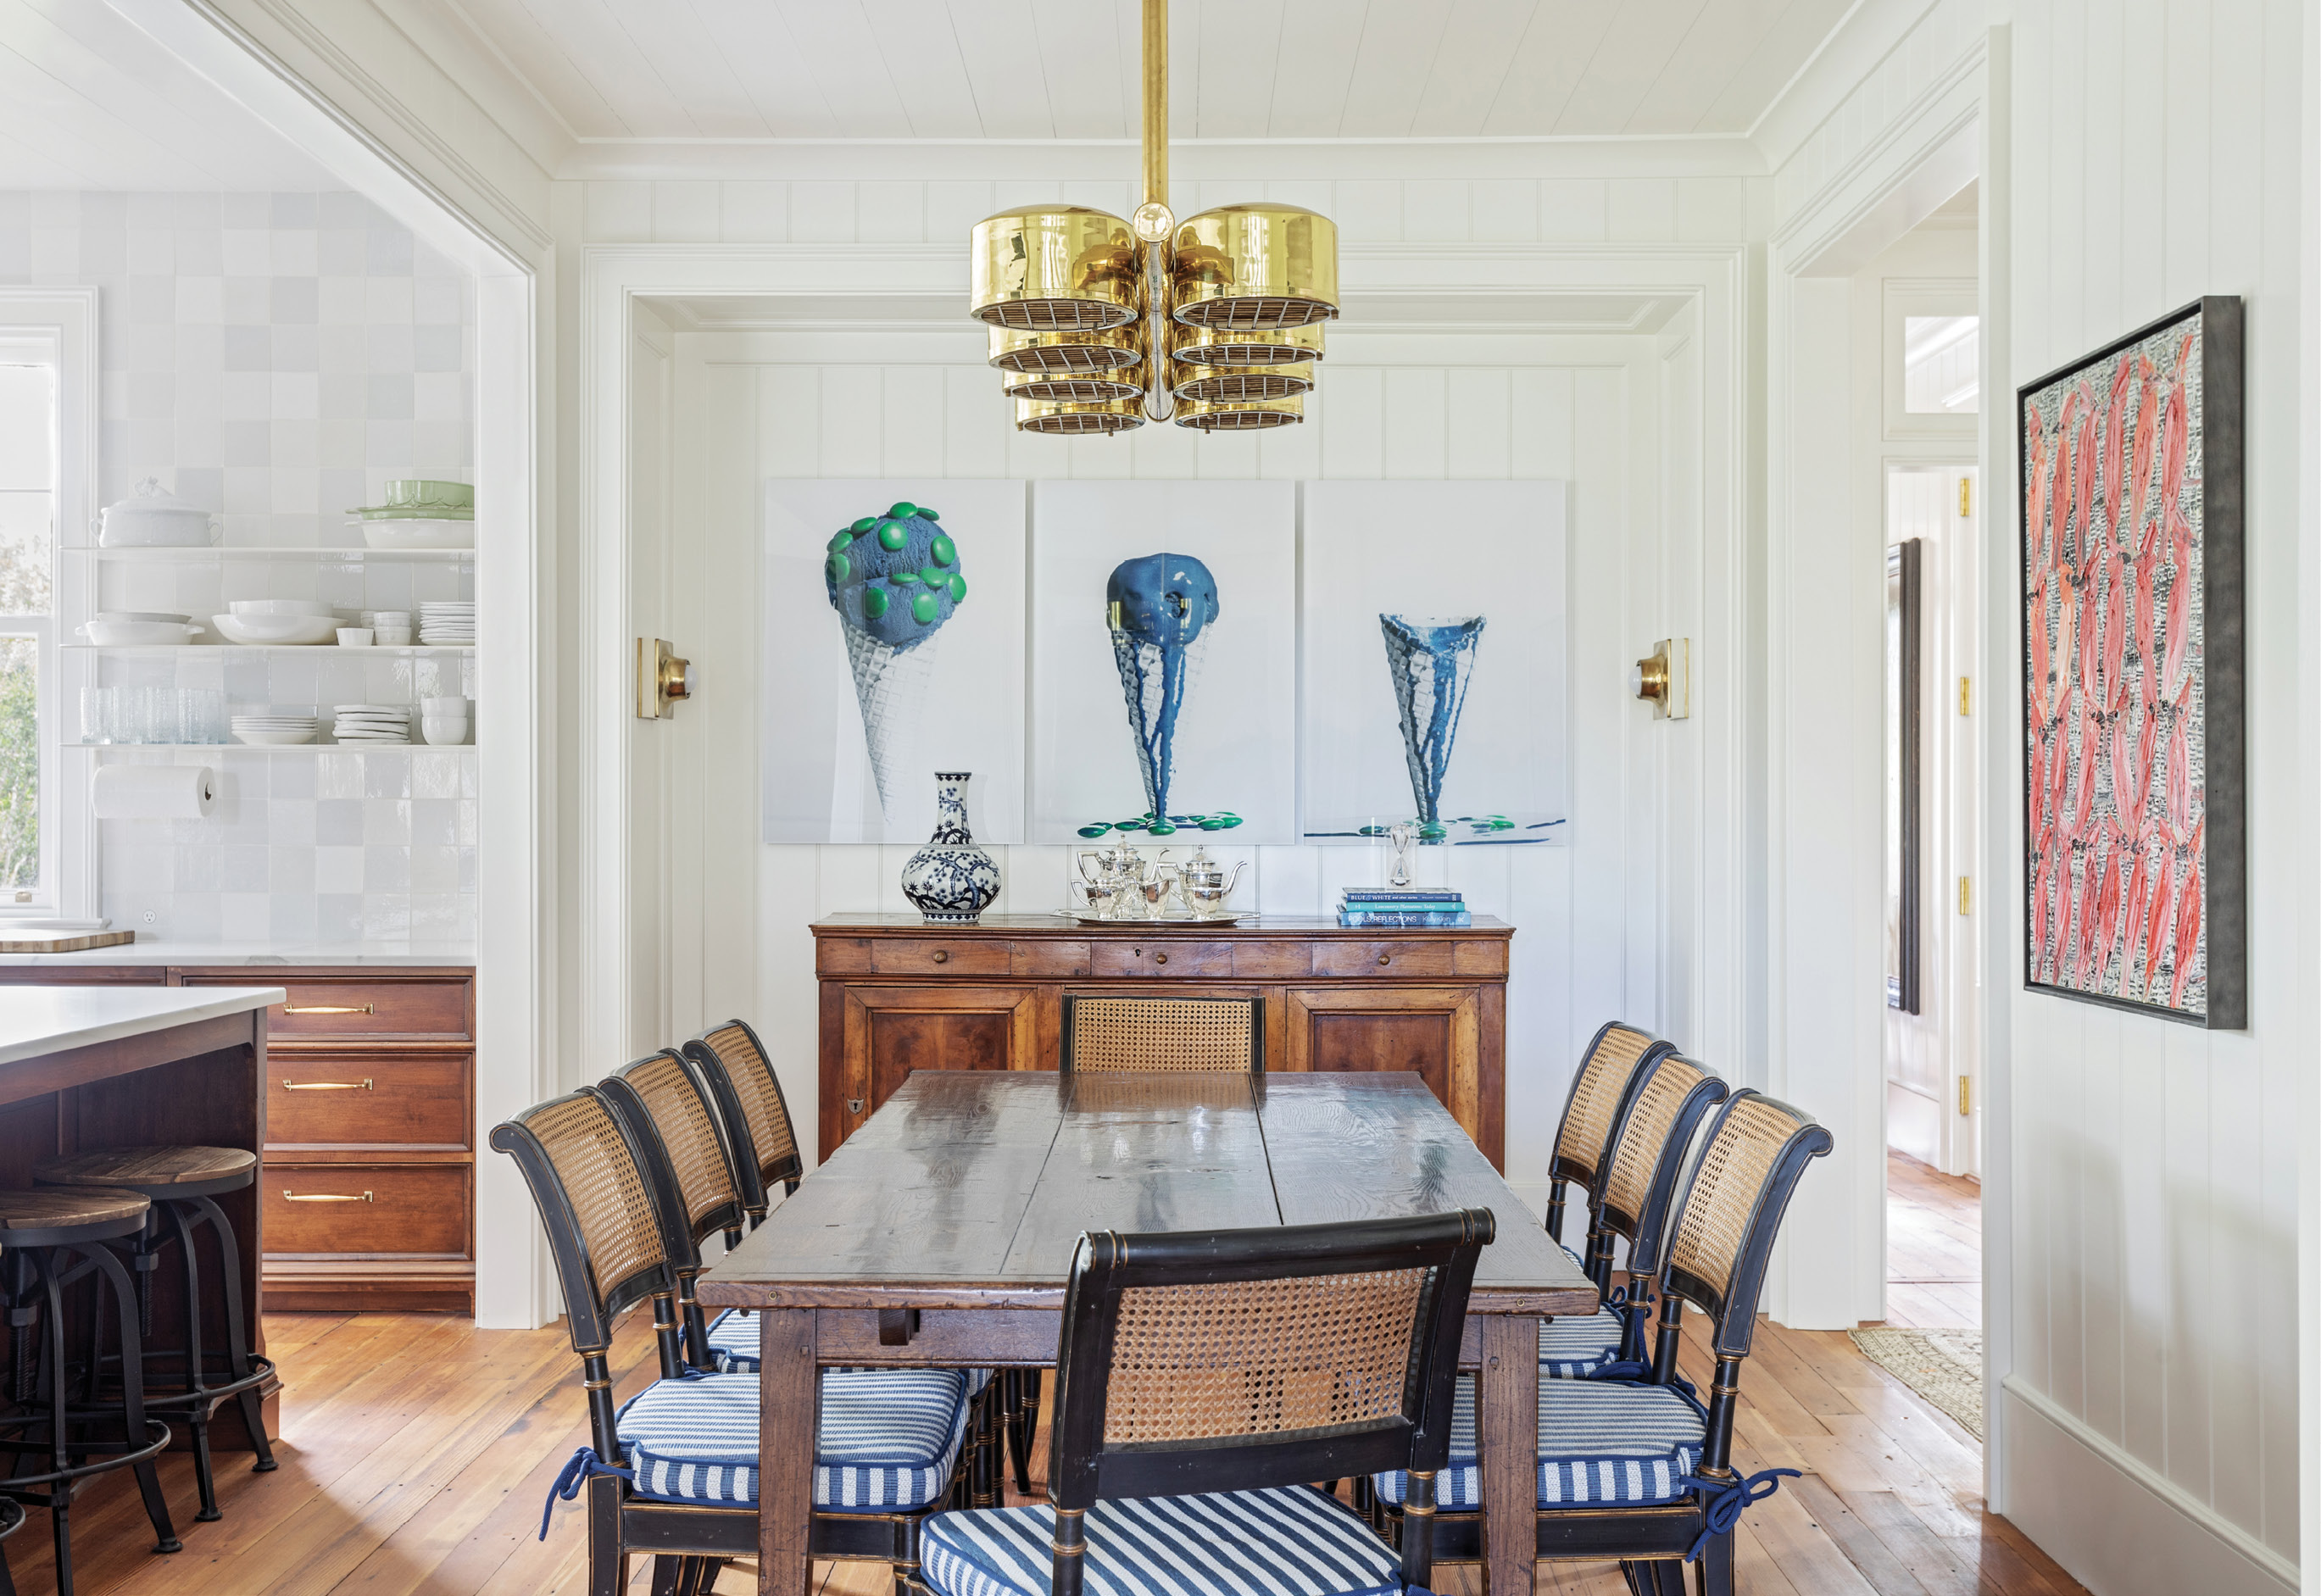 Thanks to the wife’s expert eye and quick fingers on 1stDibs.com, a treasure trove of vintage and antique light fixtures complements the interiors. In the dining room, both the nautically inspired chandelier and brass wall sconces were sourced from the site, the latter to illuminate the melting ice cream triptych, Picture Global Warming, by Swedish photographer Clara Hallencreutz.